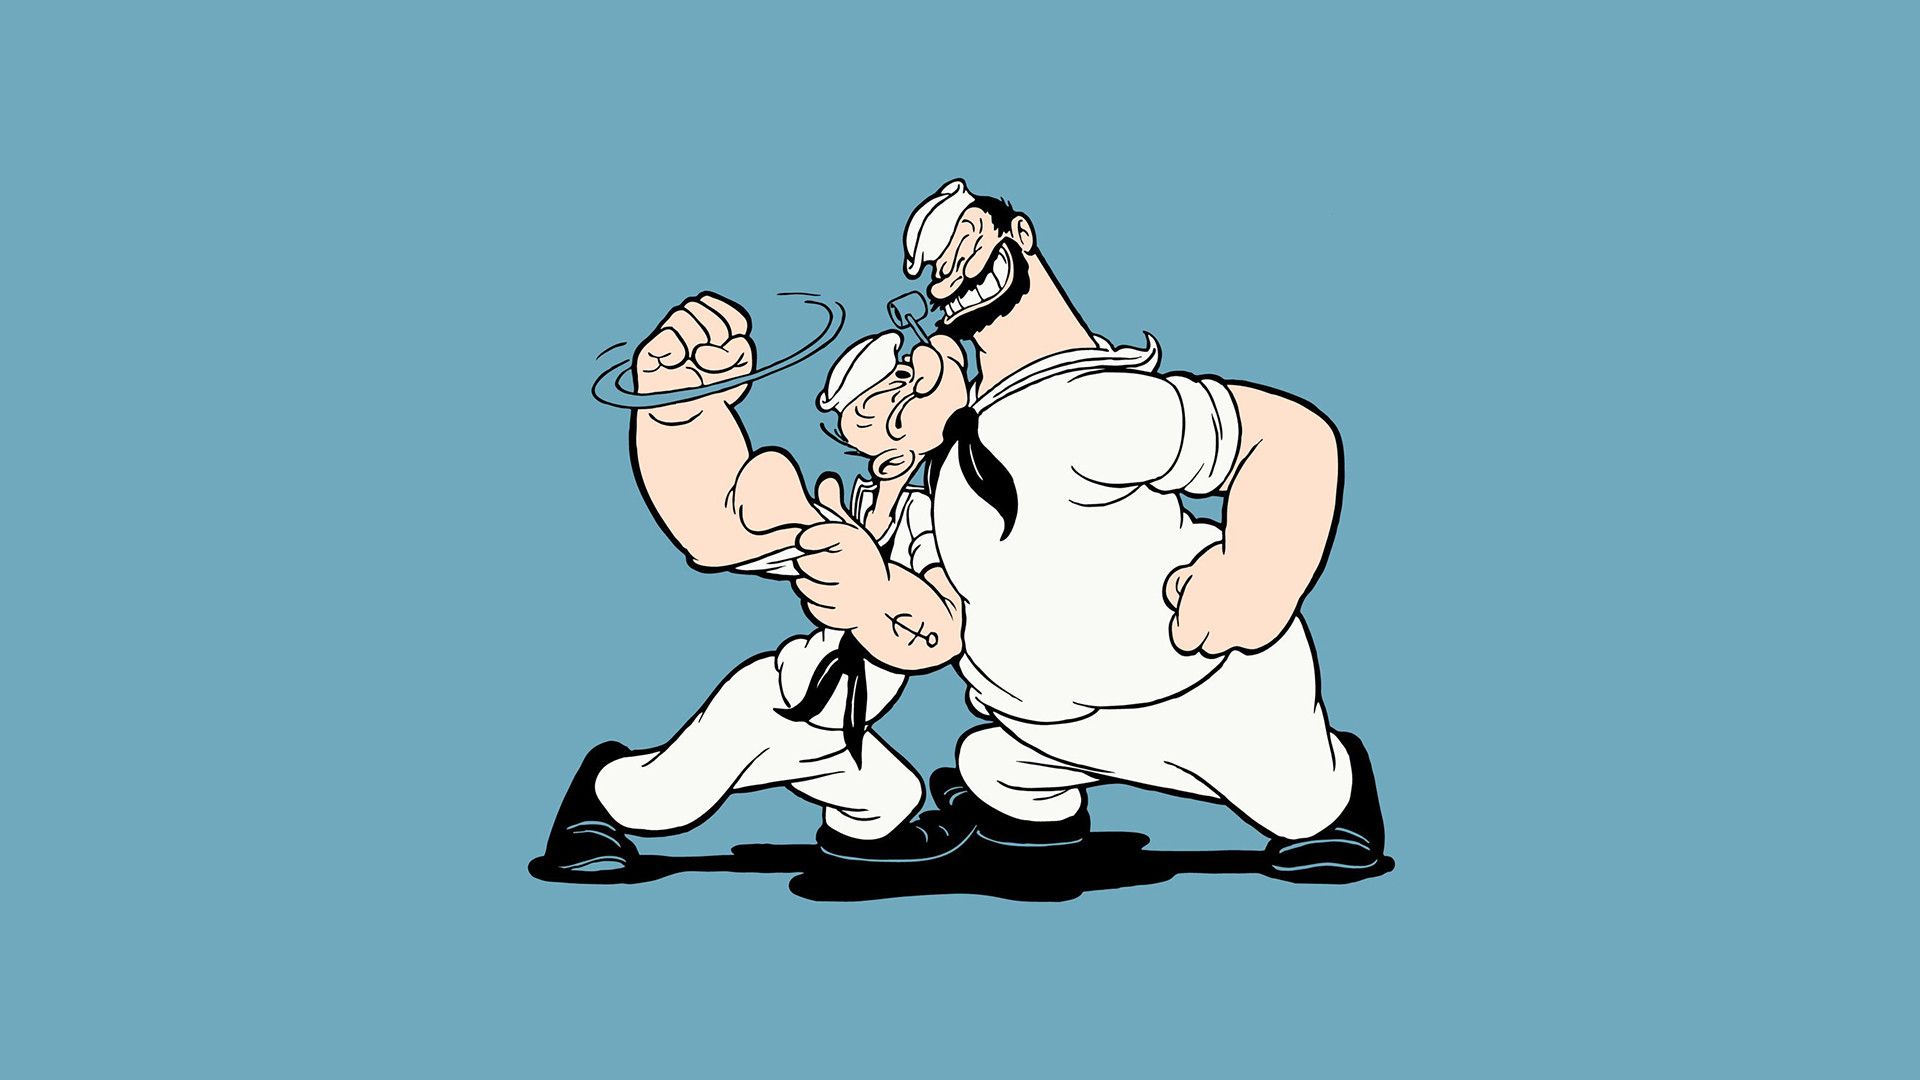 Popeye Movie HD Wallpapers  Popeye HD Movie Wallpapers Free Download  1080p to 2K  FilmiBeat